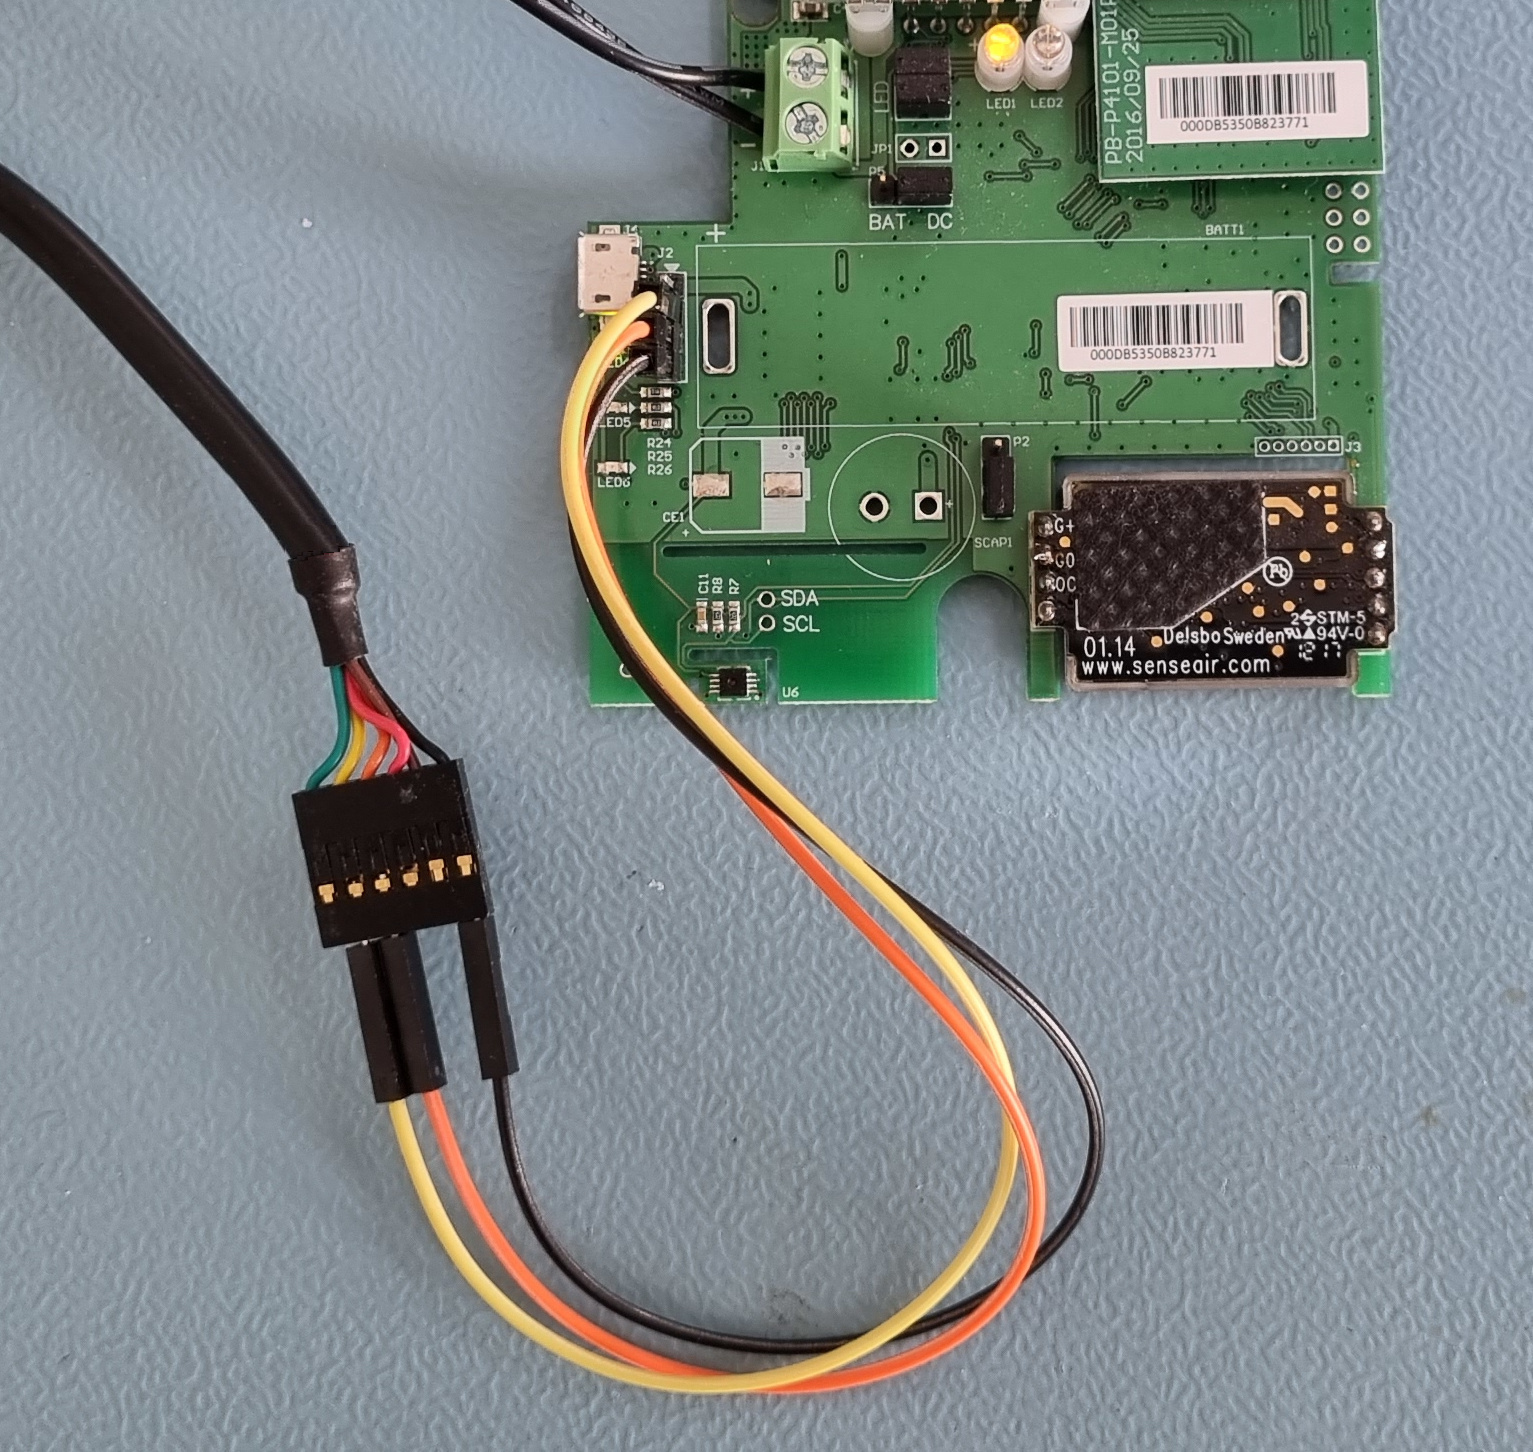 The FTDI cable connected using some jumper wires